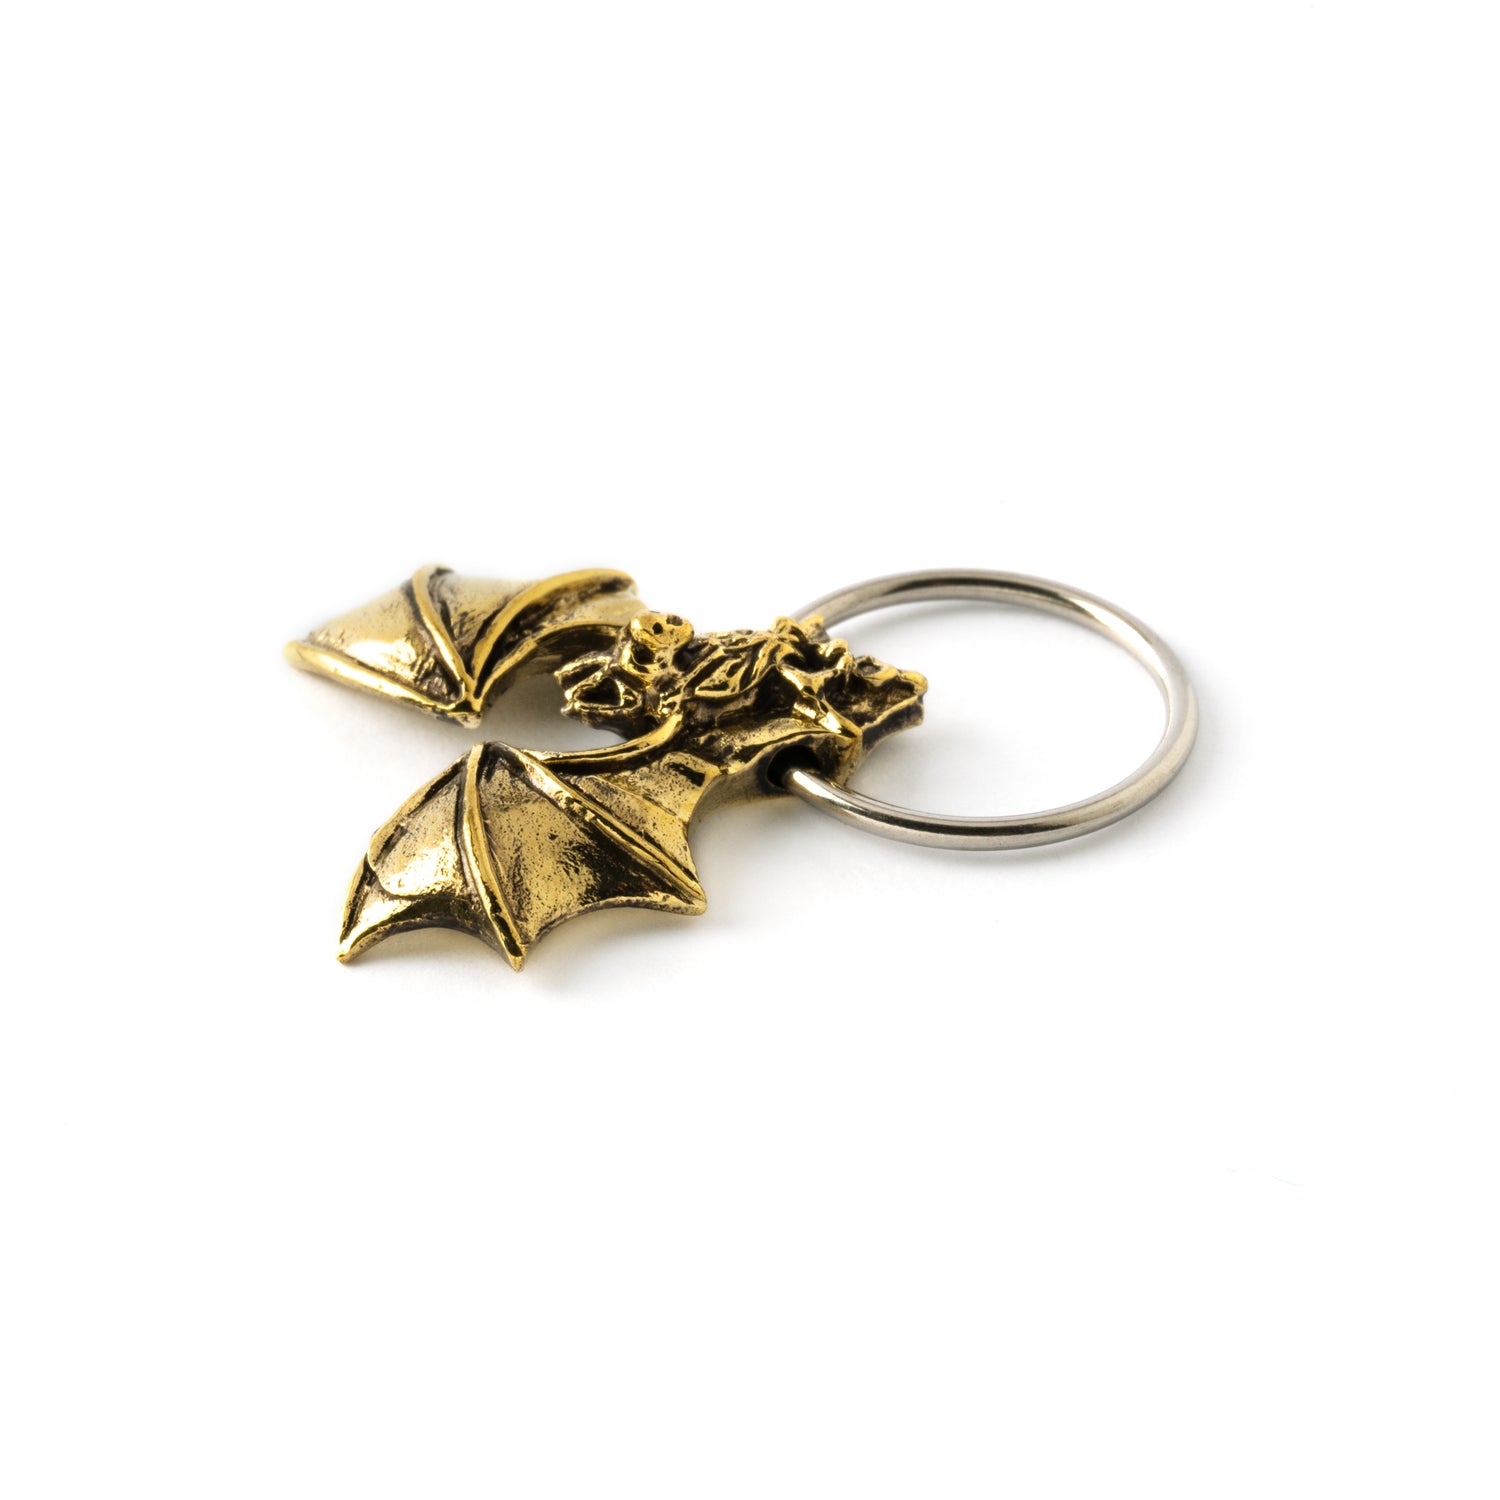 surgical steel piercing ring finely with detailed antique gold colour bat ornament close up view